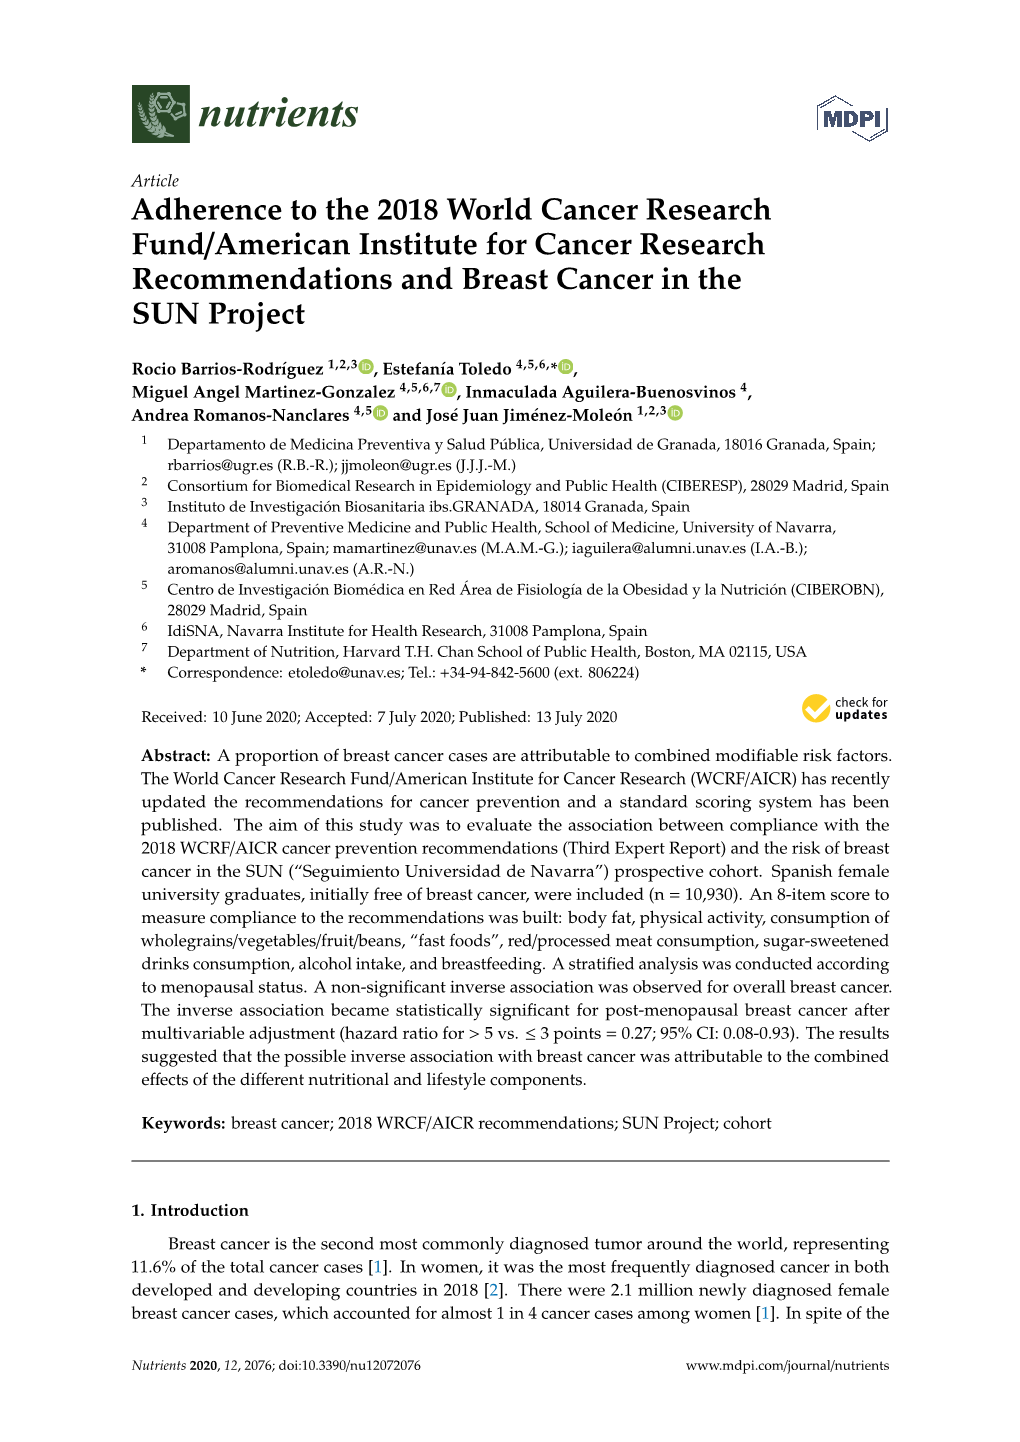 Adherence to the 2018 World Cancer Research Fund/American Institute for Cancer Research Recommendations and Breast Cancer in the SUN Project